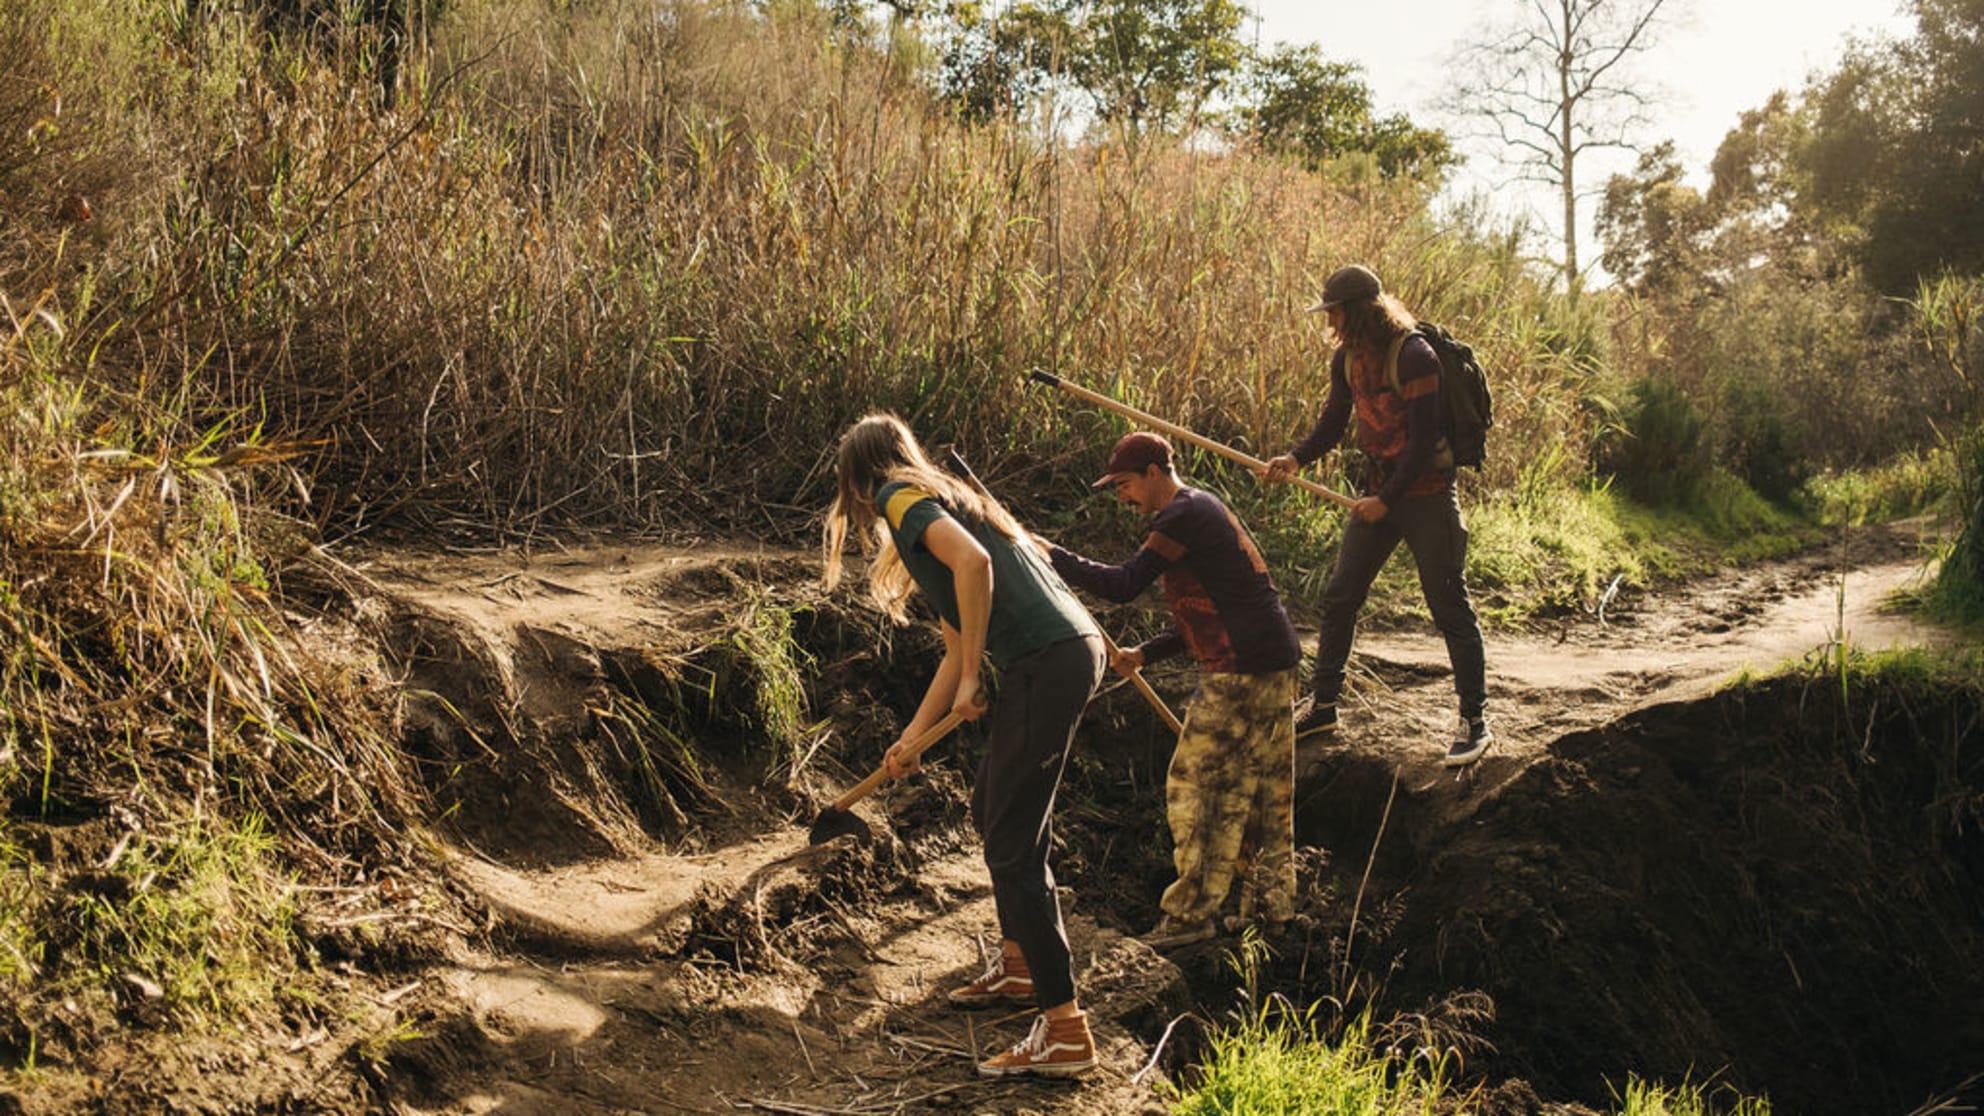 Trail building is the cornerstone of MTB culture. Meet the Sage Trail Alliance.